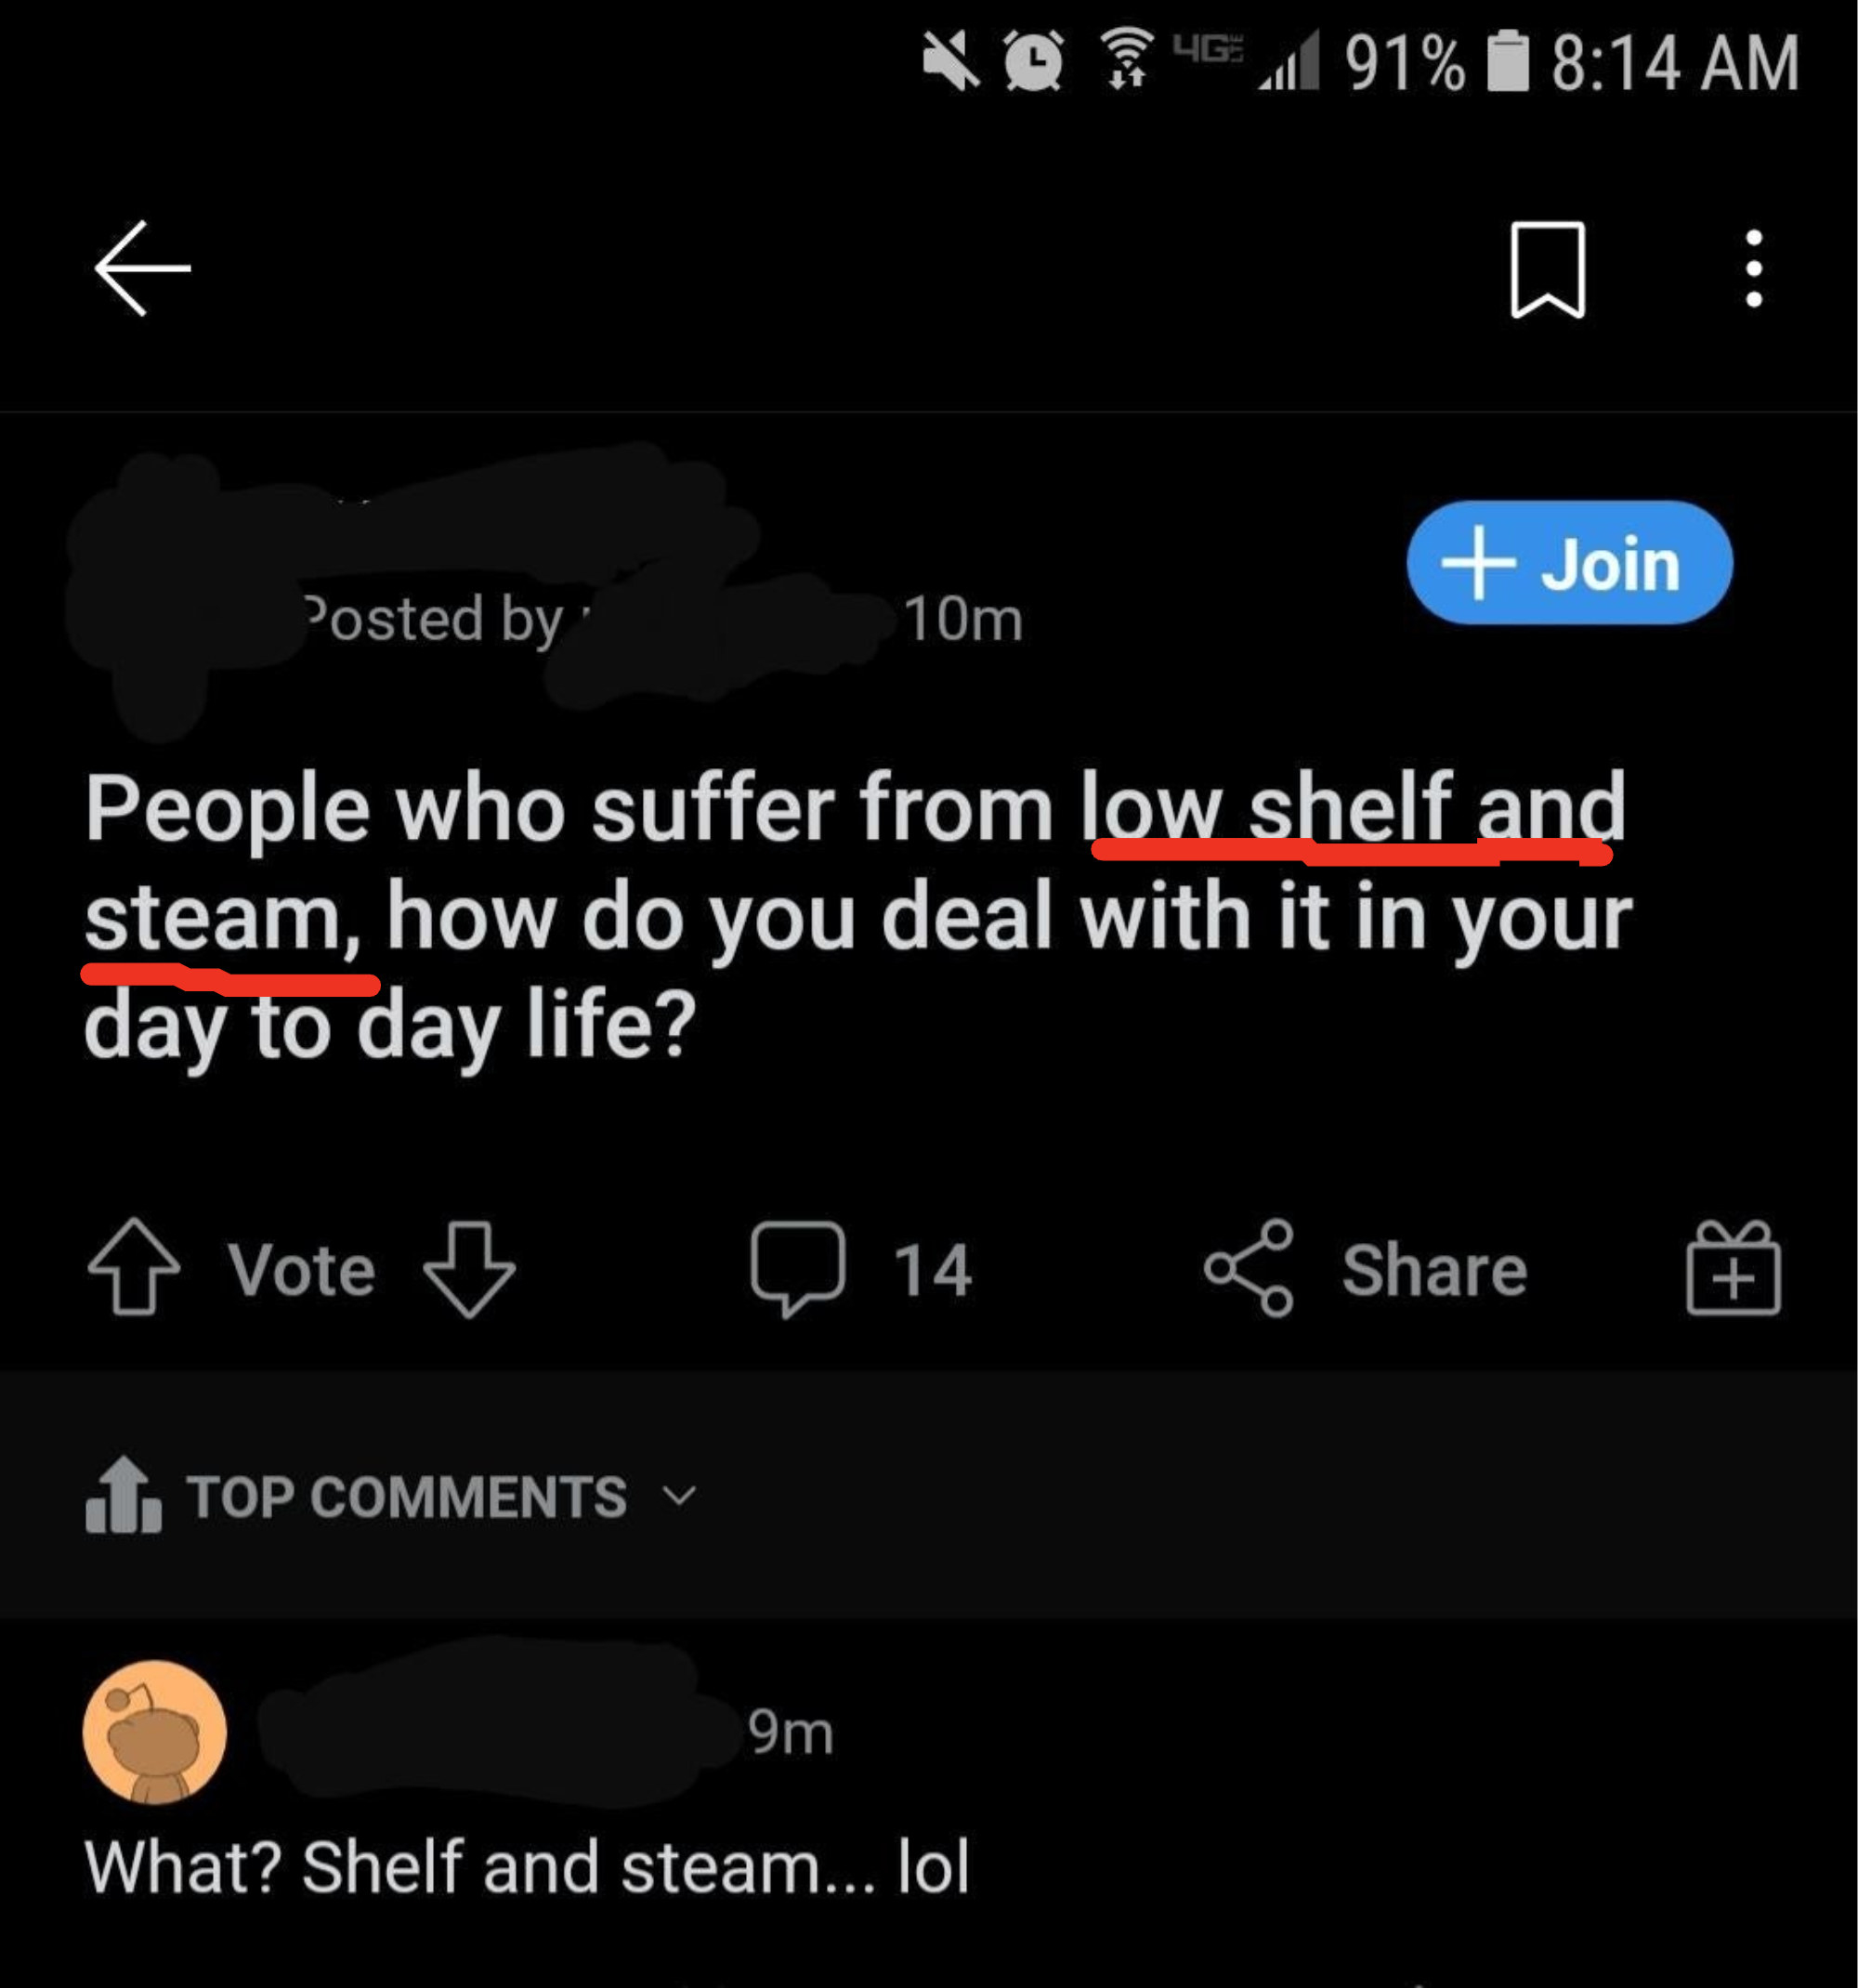 Person referring to people who suffer from &quot;low shelf and steam&quot; instead of low self-esteem